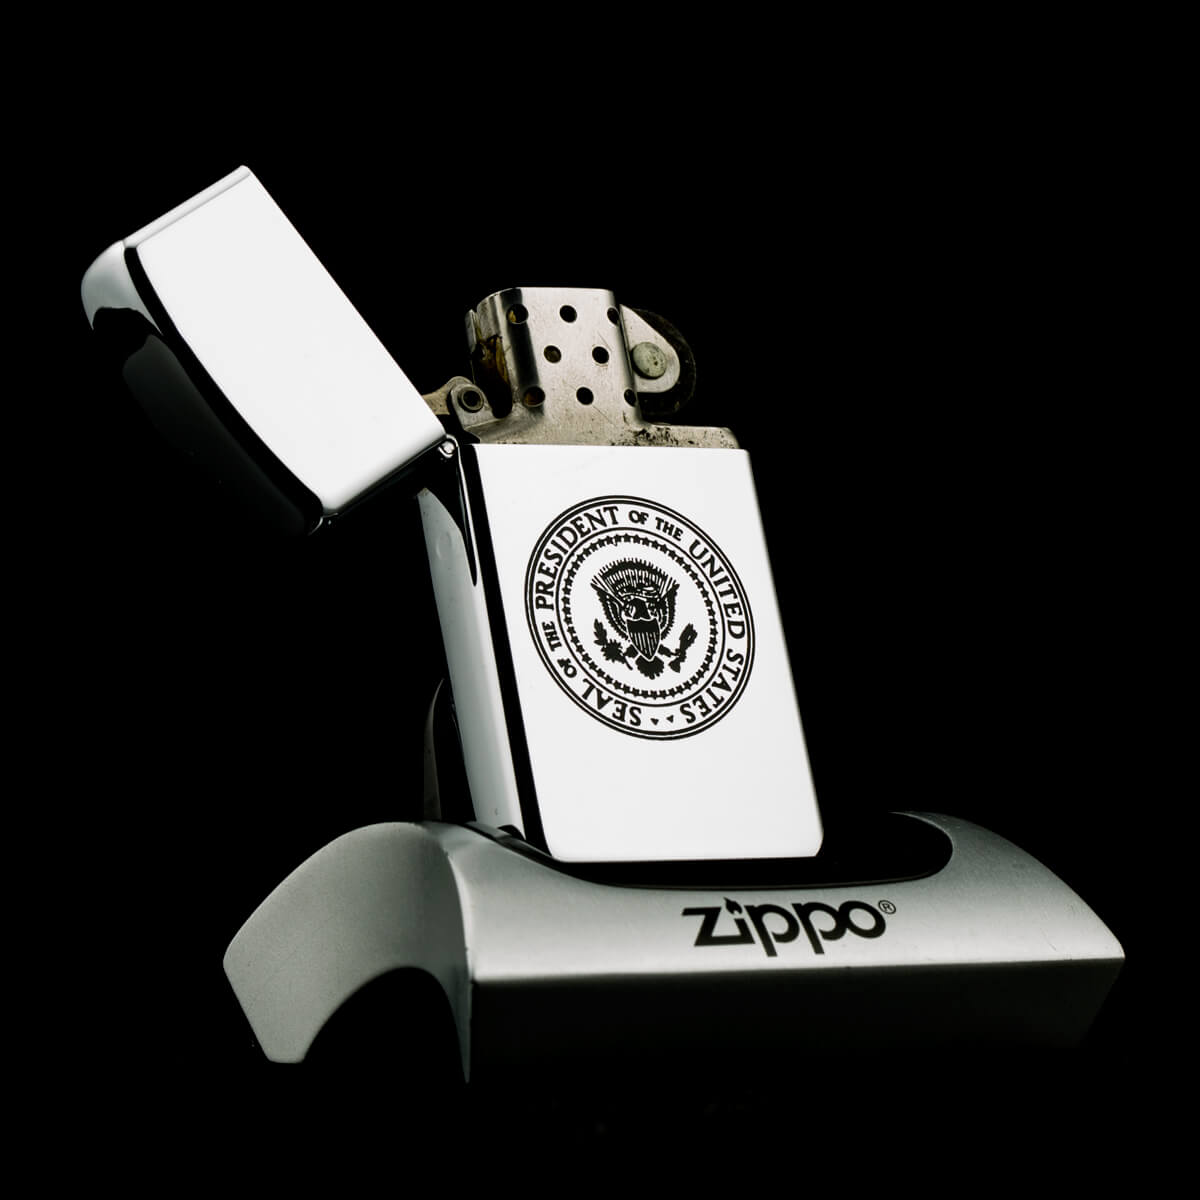 hot-quet-zippo-army-one-seal-of-president-of-the-united-states-iv-1998-huy-hieu-tong-thong-my